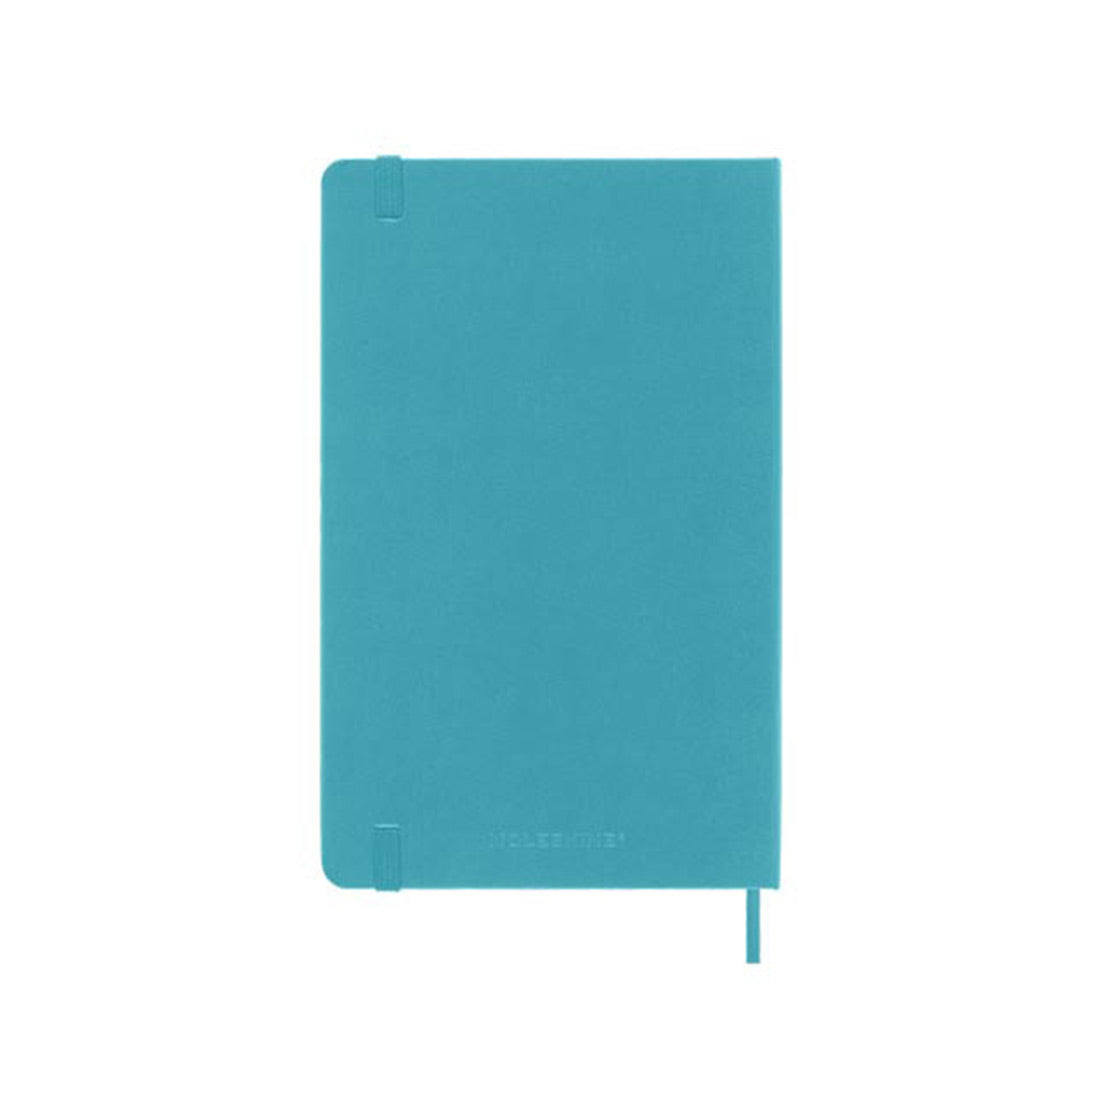 Moleskine Classic Large Ruled Hard Cover Notebook Reef Blue